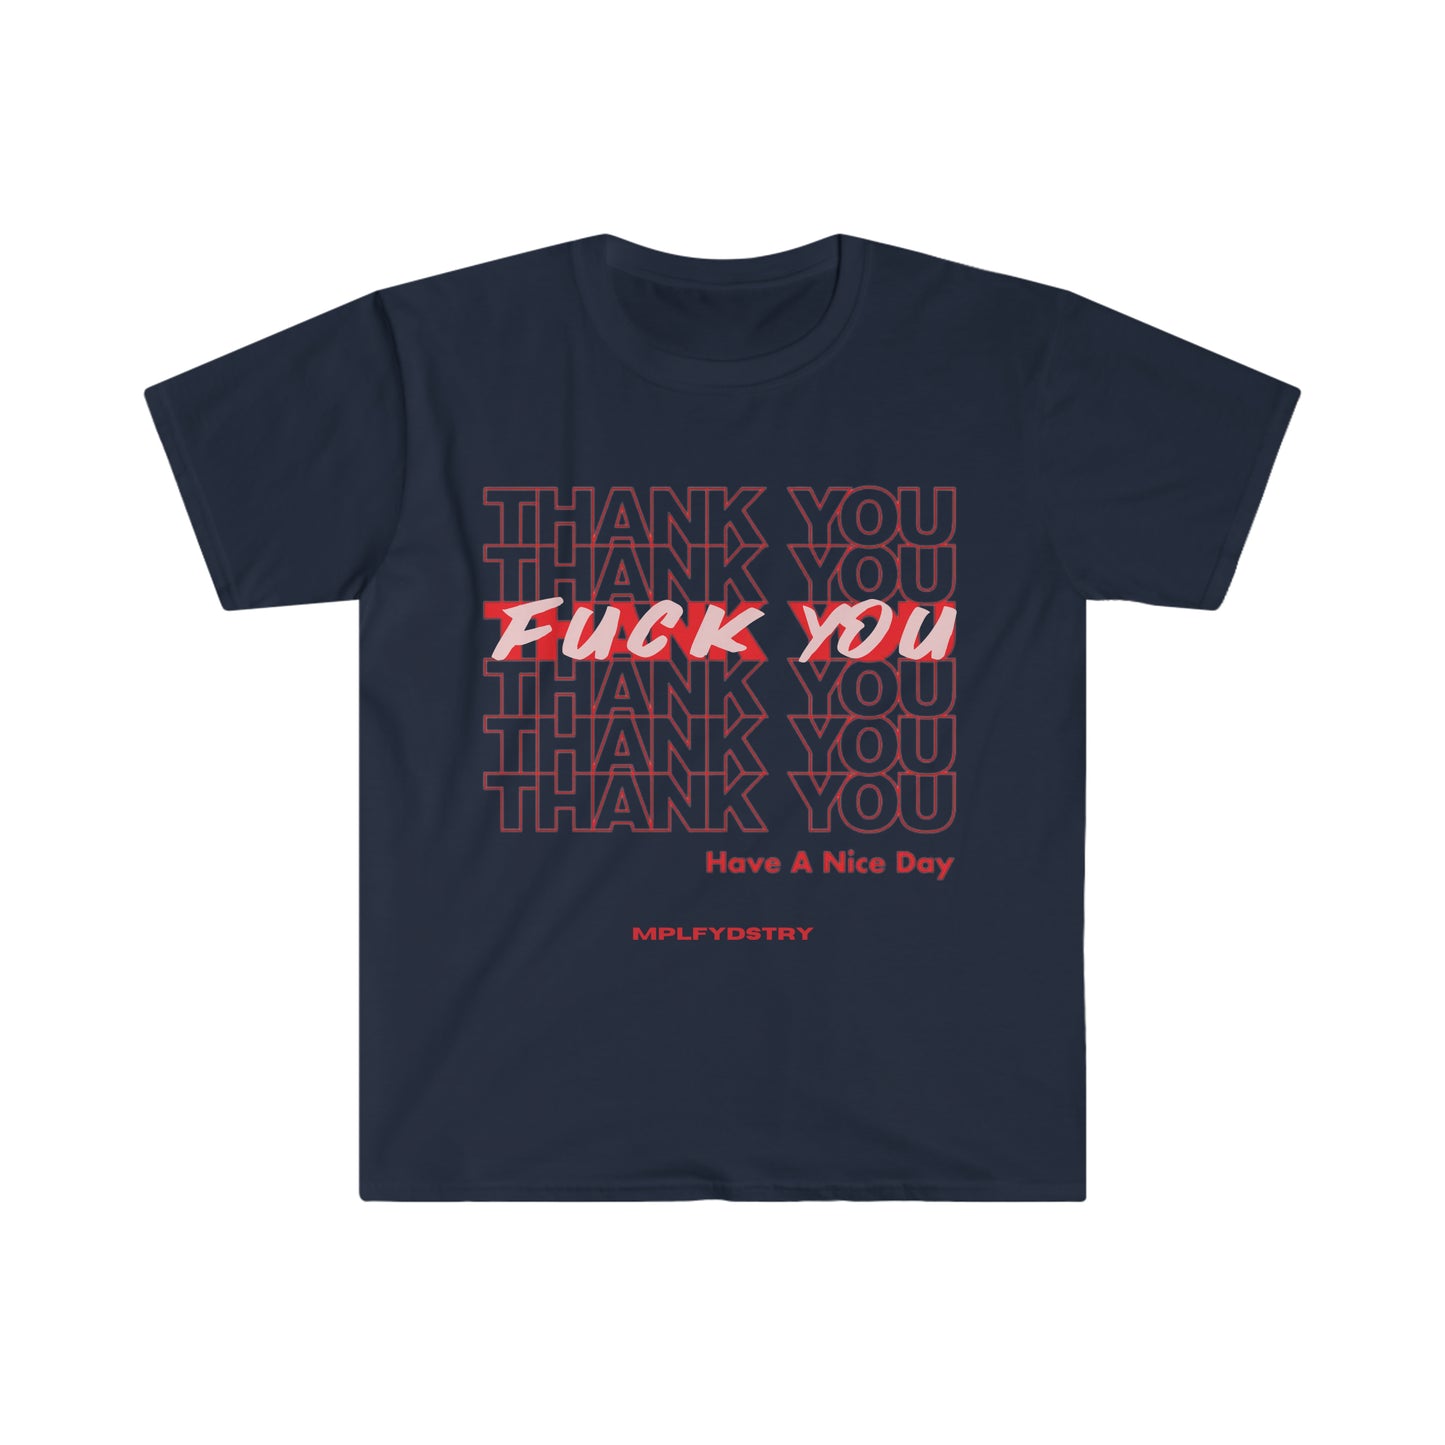 THANK YOU Classic Fit AmplifyDestroy Print Tee Shirt